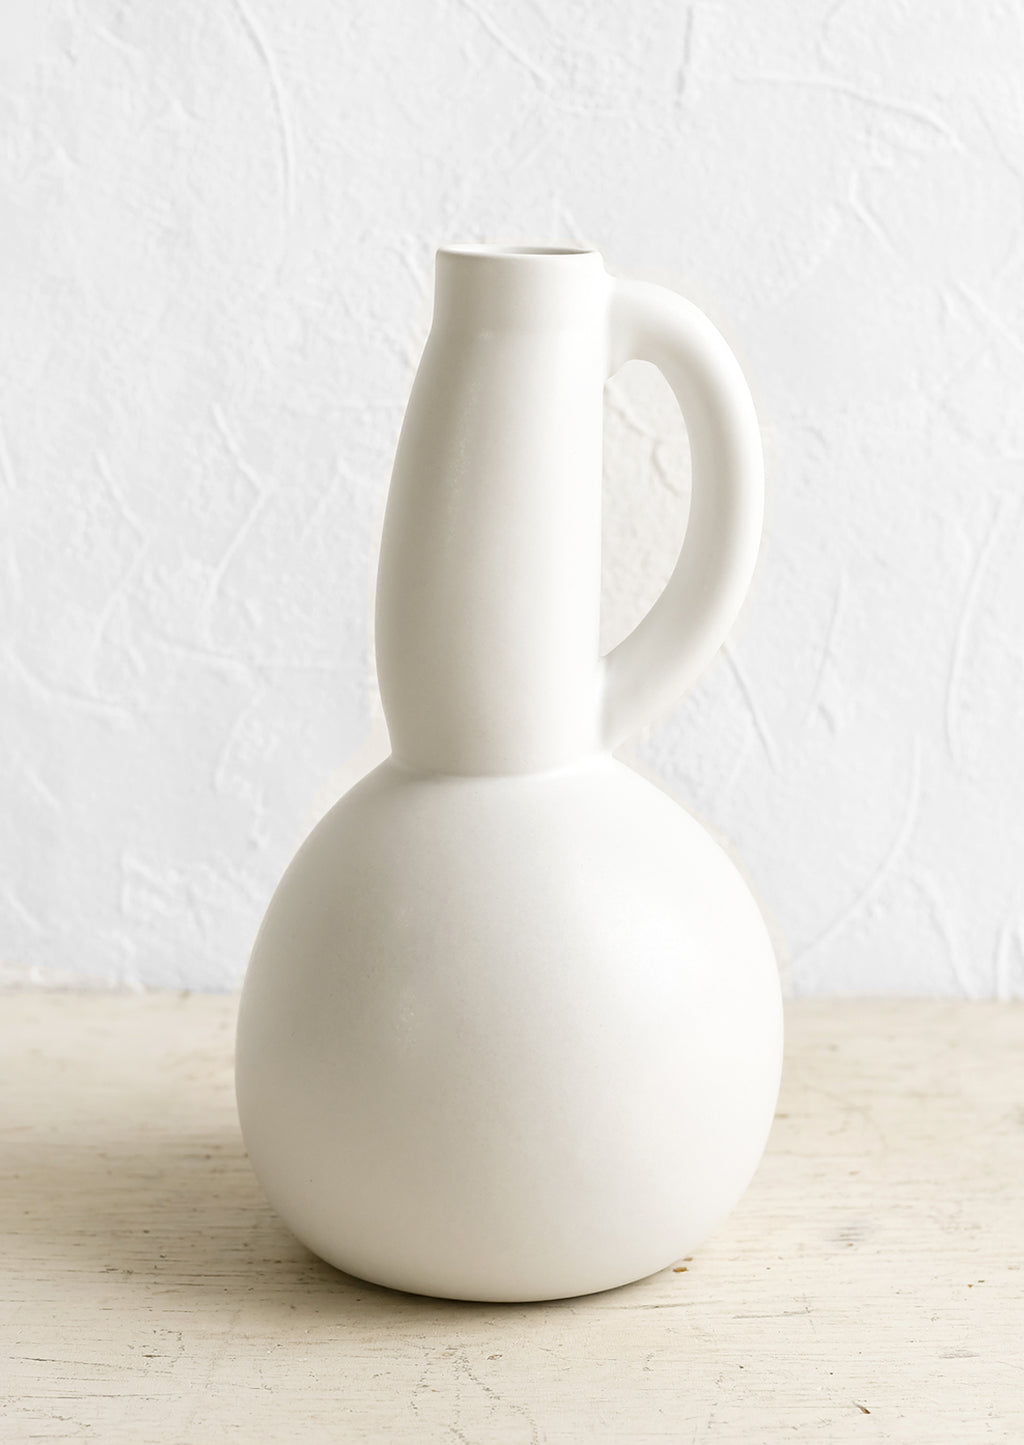 1: A white ceramic pitcher with curved, voluptuous silhouette.